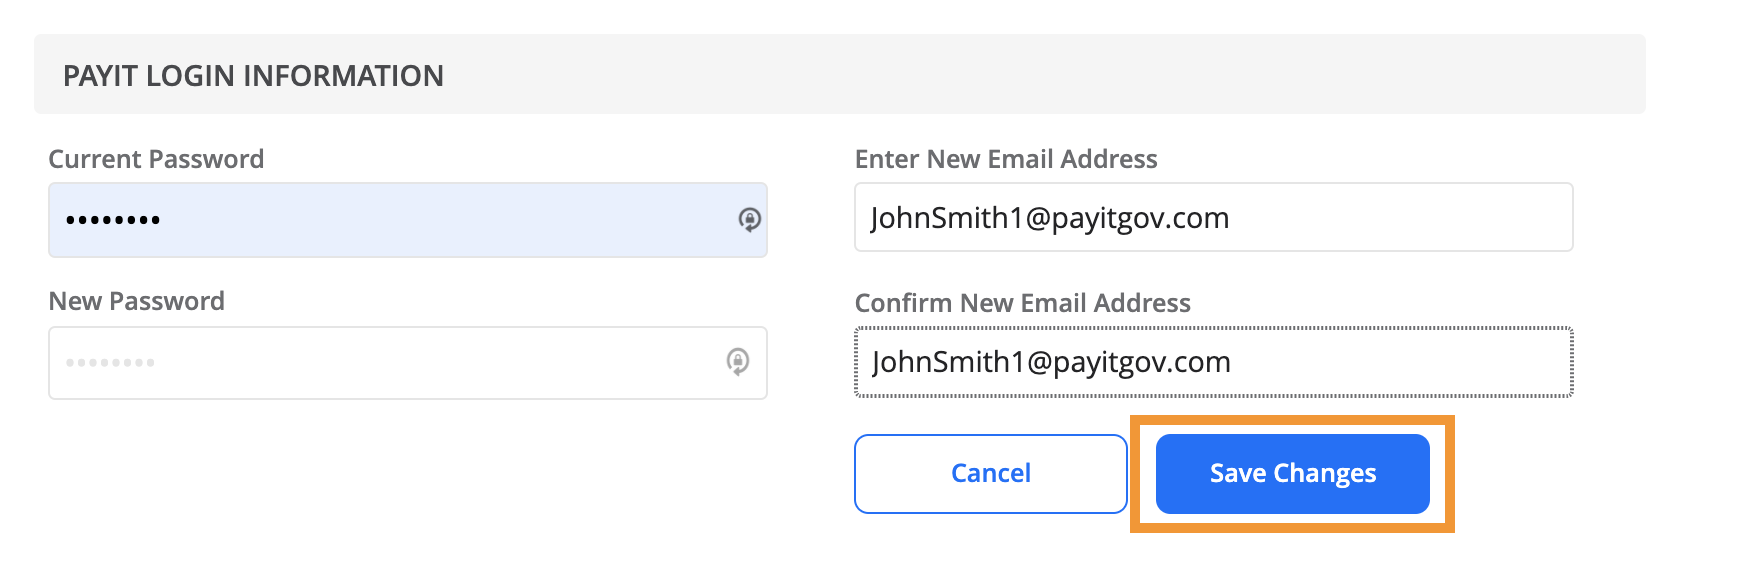 how to change my email address in my microsoft account